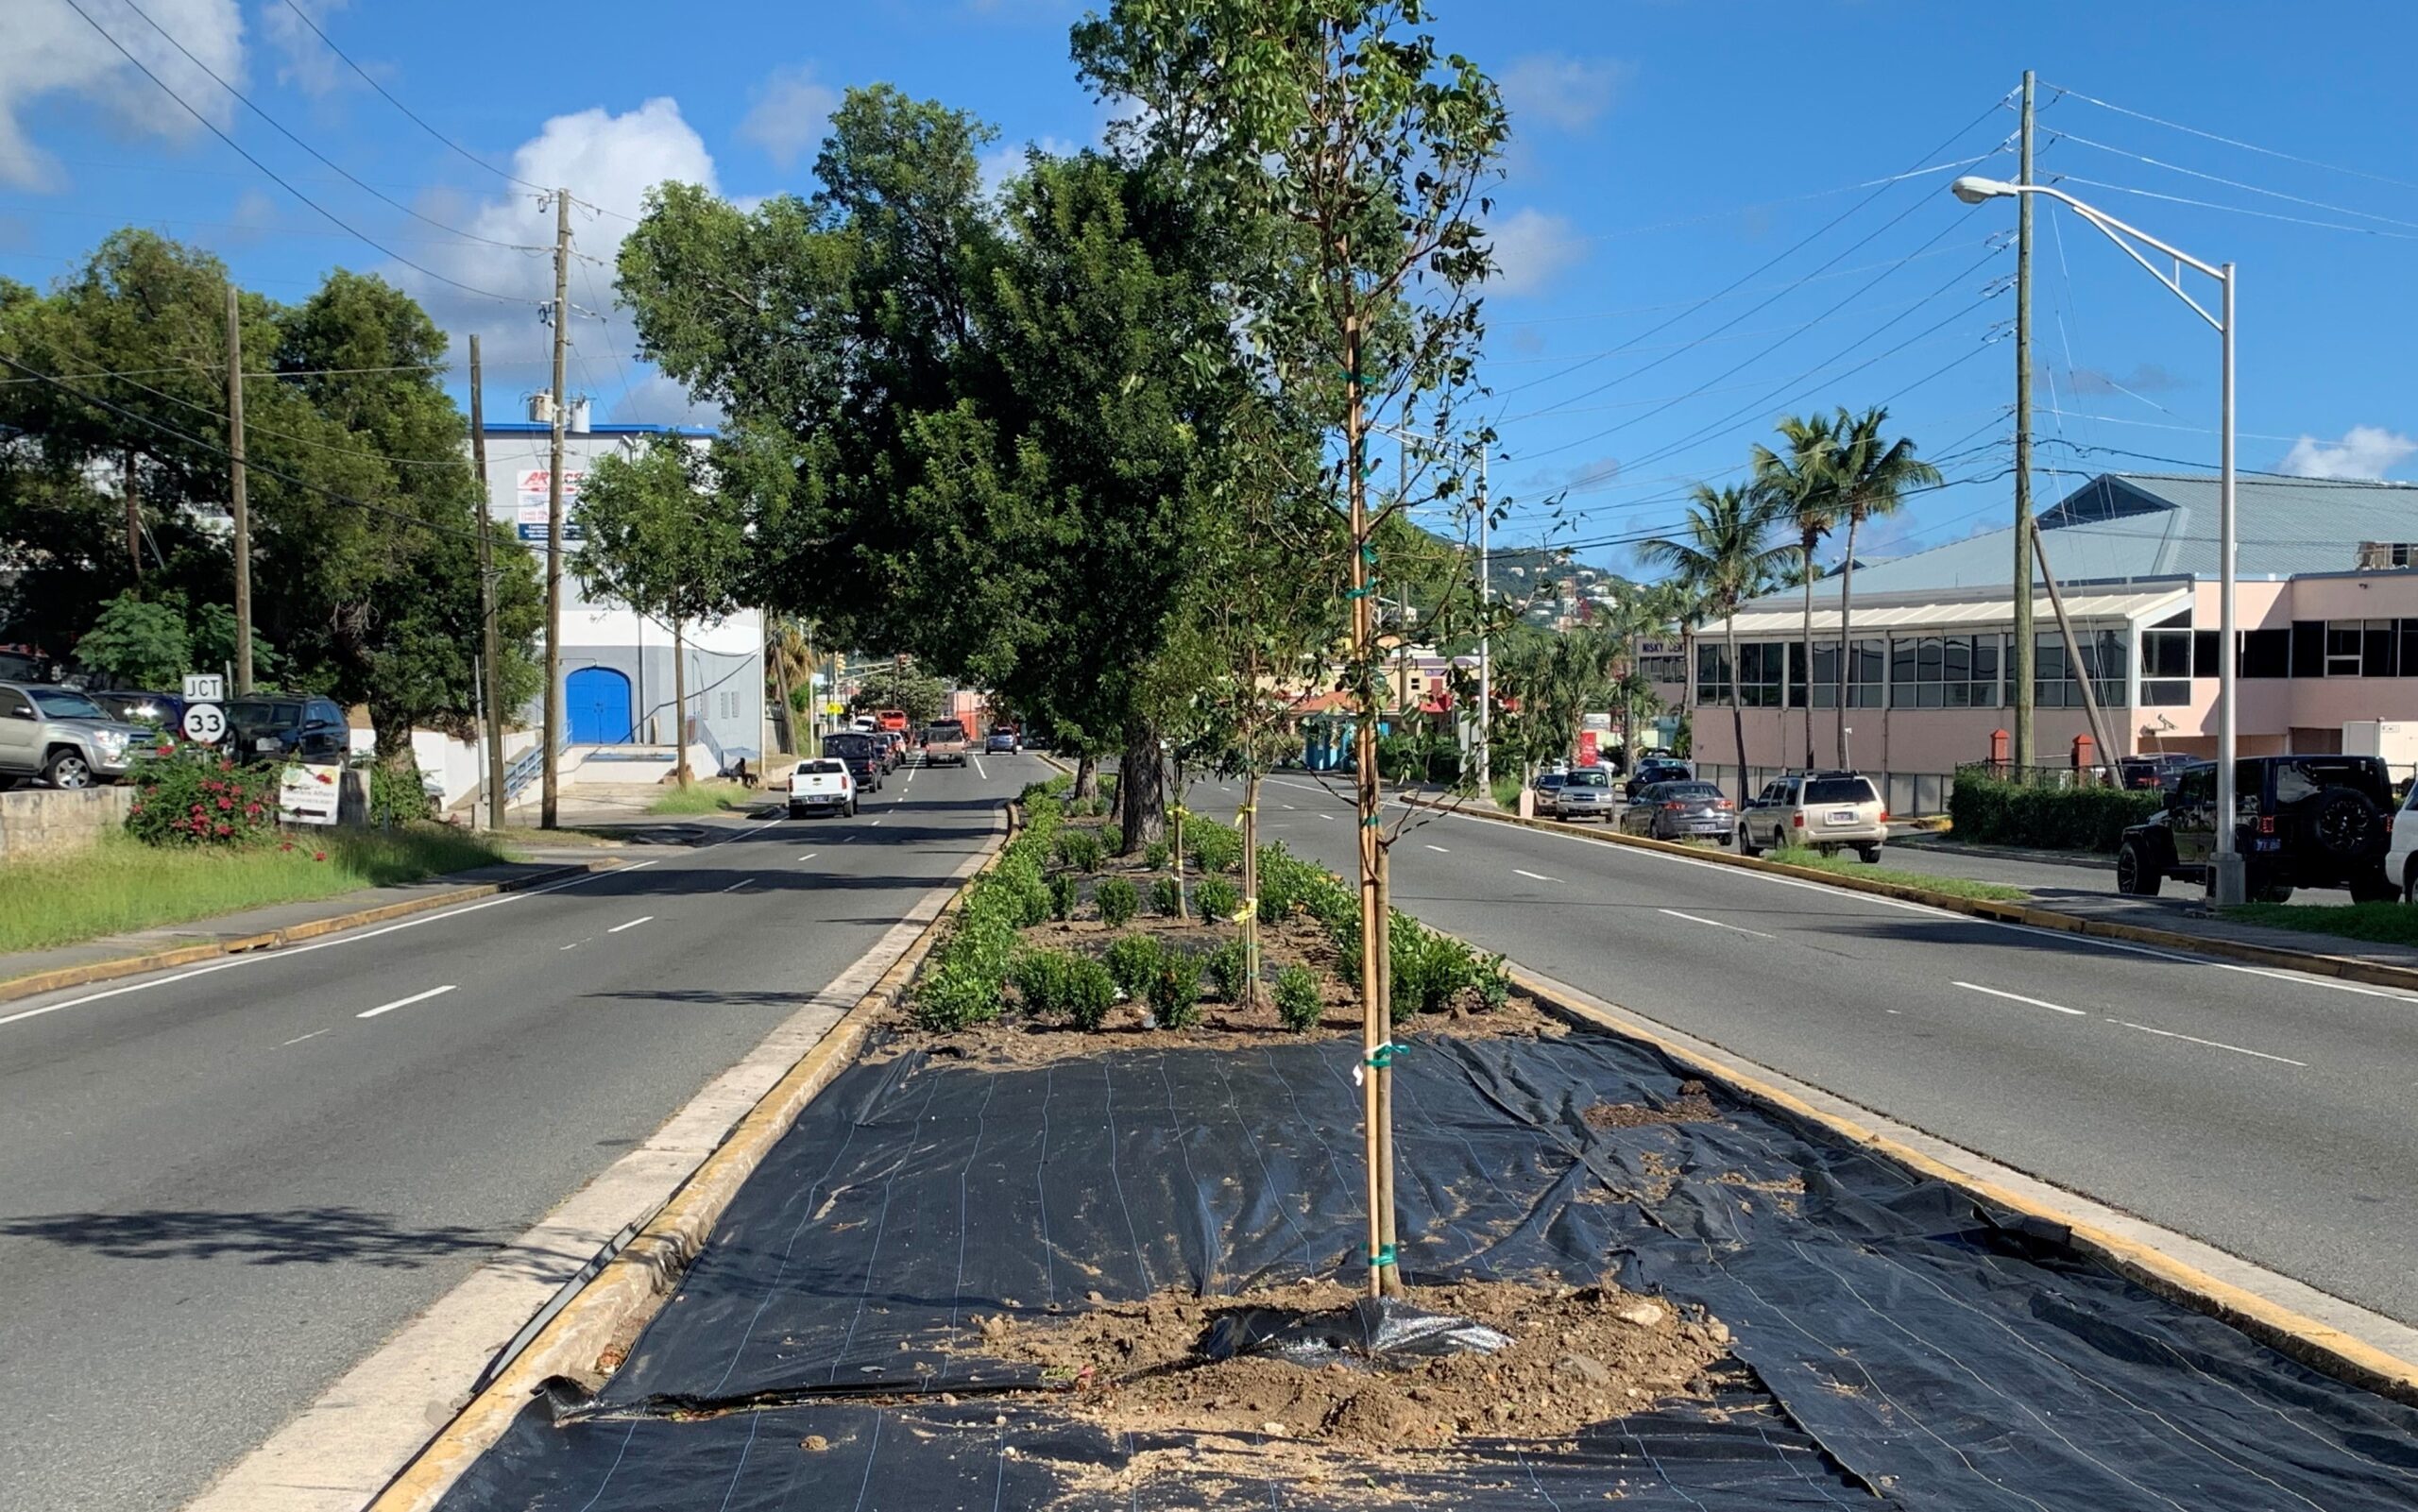 DPW Seeks To Beautify St. Thomas Roadsides Through Pilot Landscaping Project